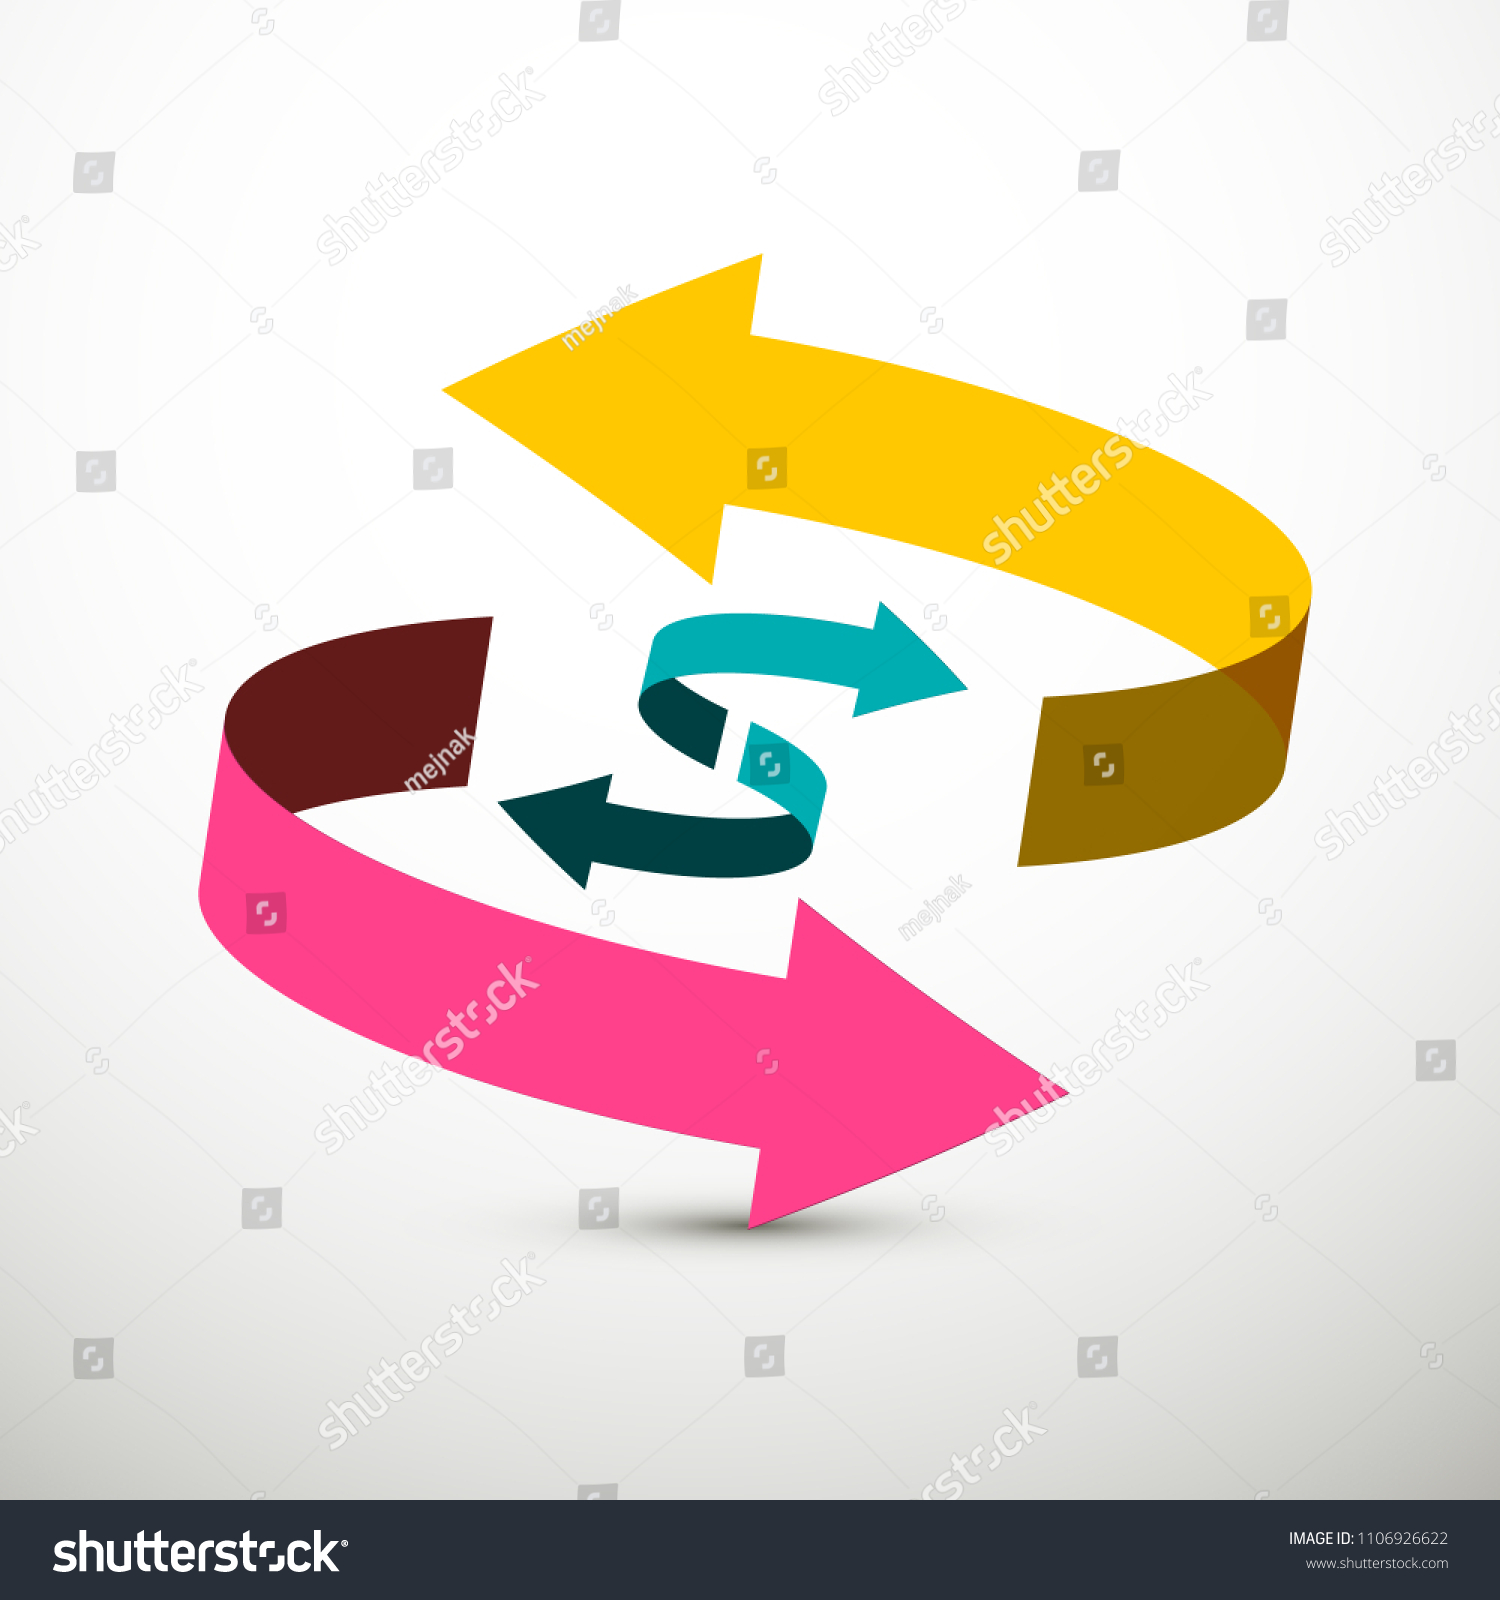 Up and Down Arrows - Pink, Yellow and Blue. Vector 3D Arrow Vector Symbol. #1106926622